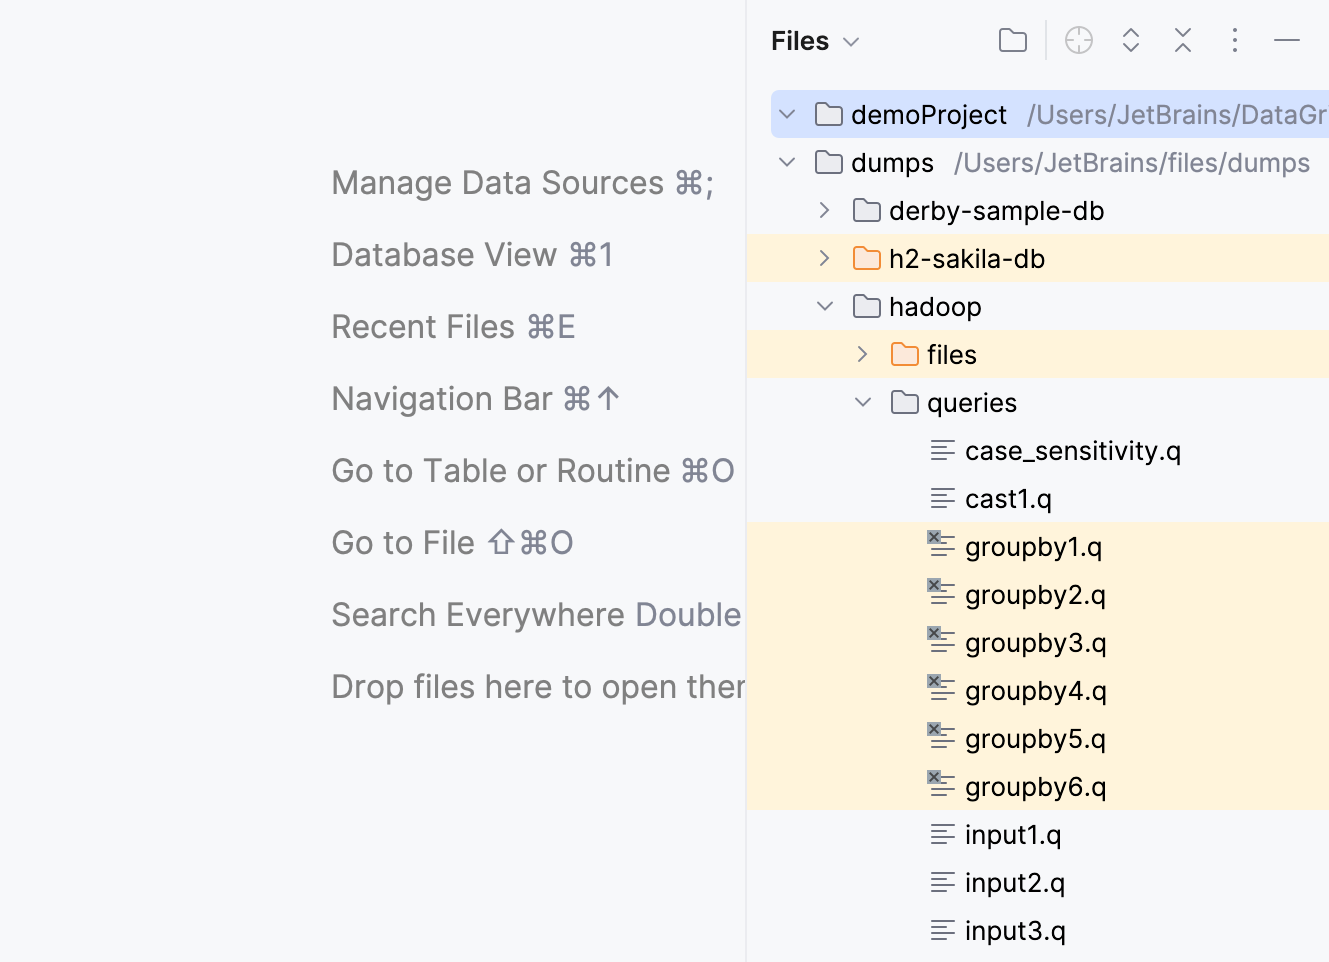 Files tool window with files and directories that are excluded from the project